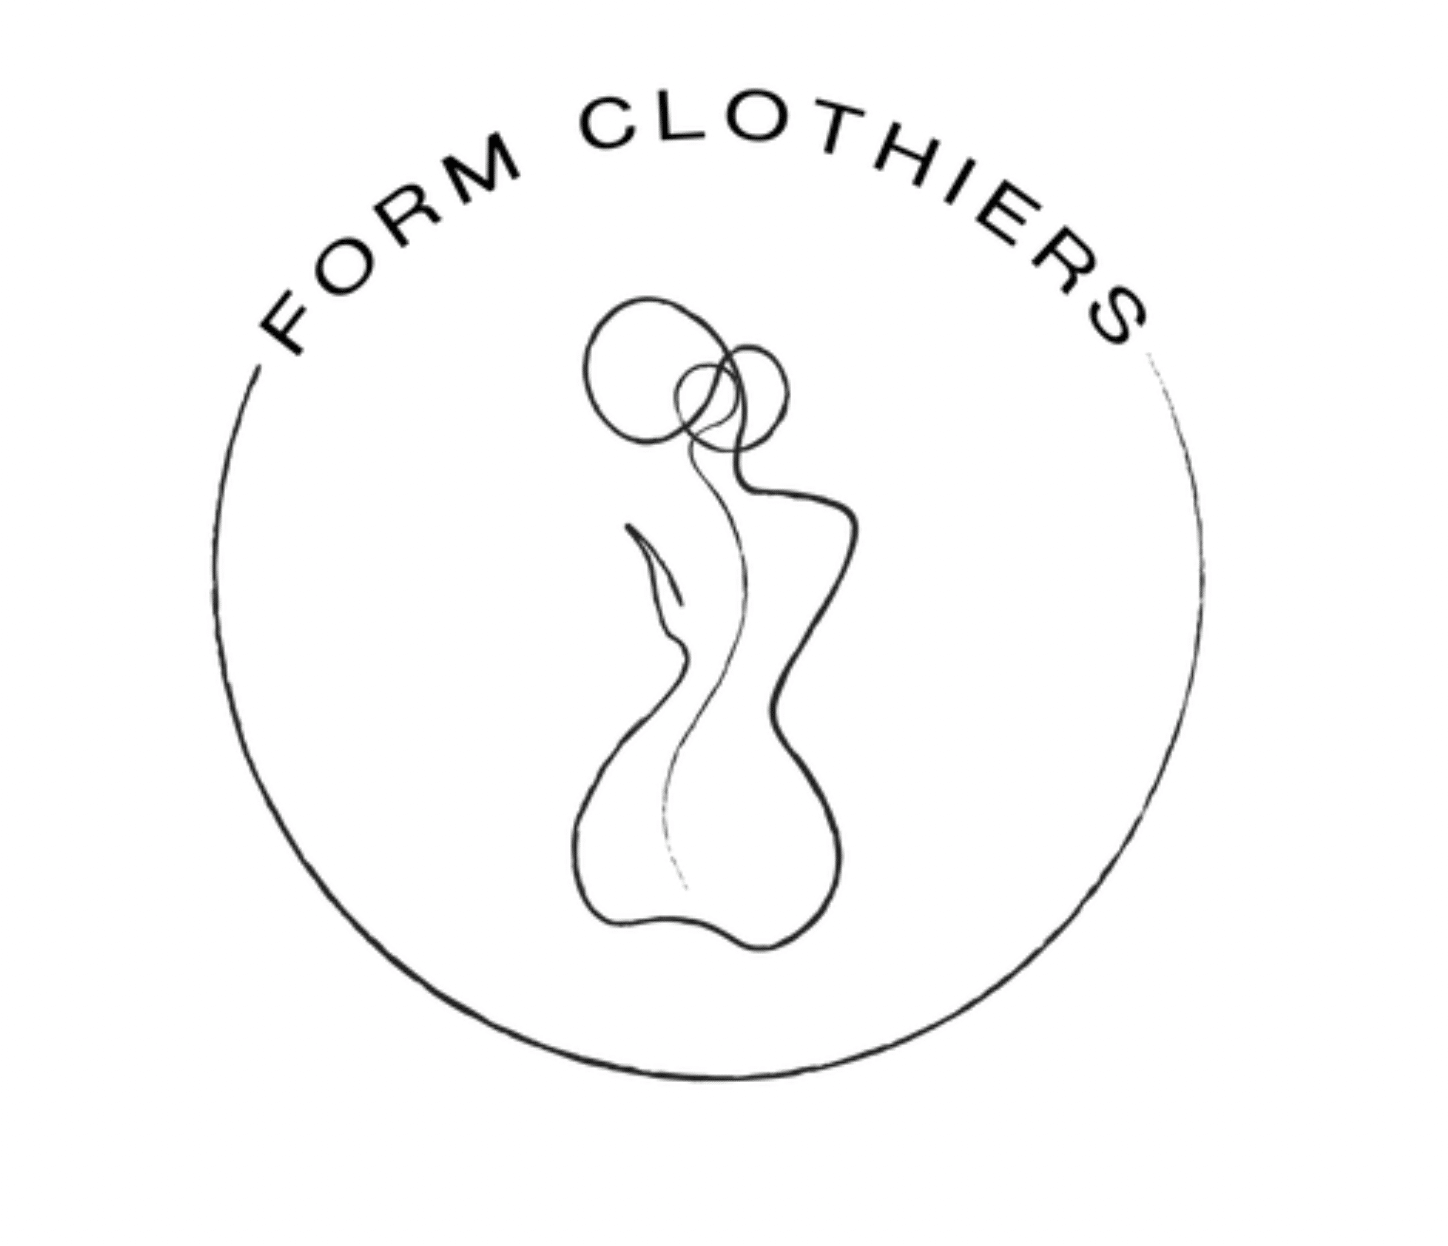 Form Clothiers - Stovehouse